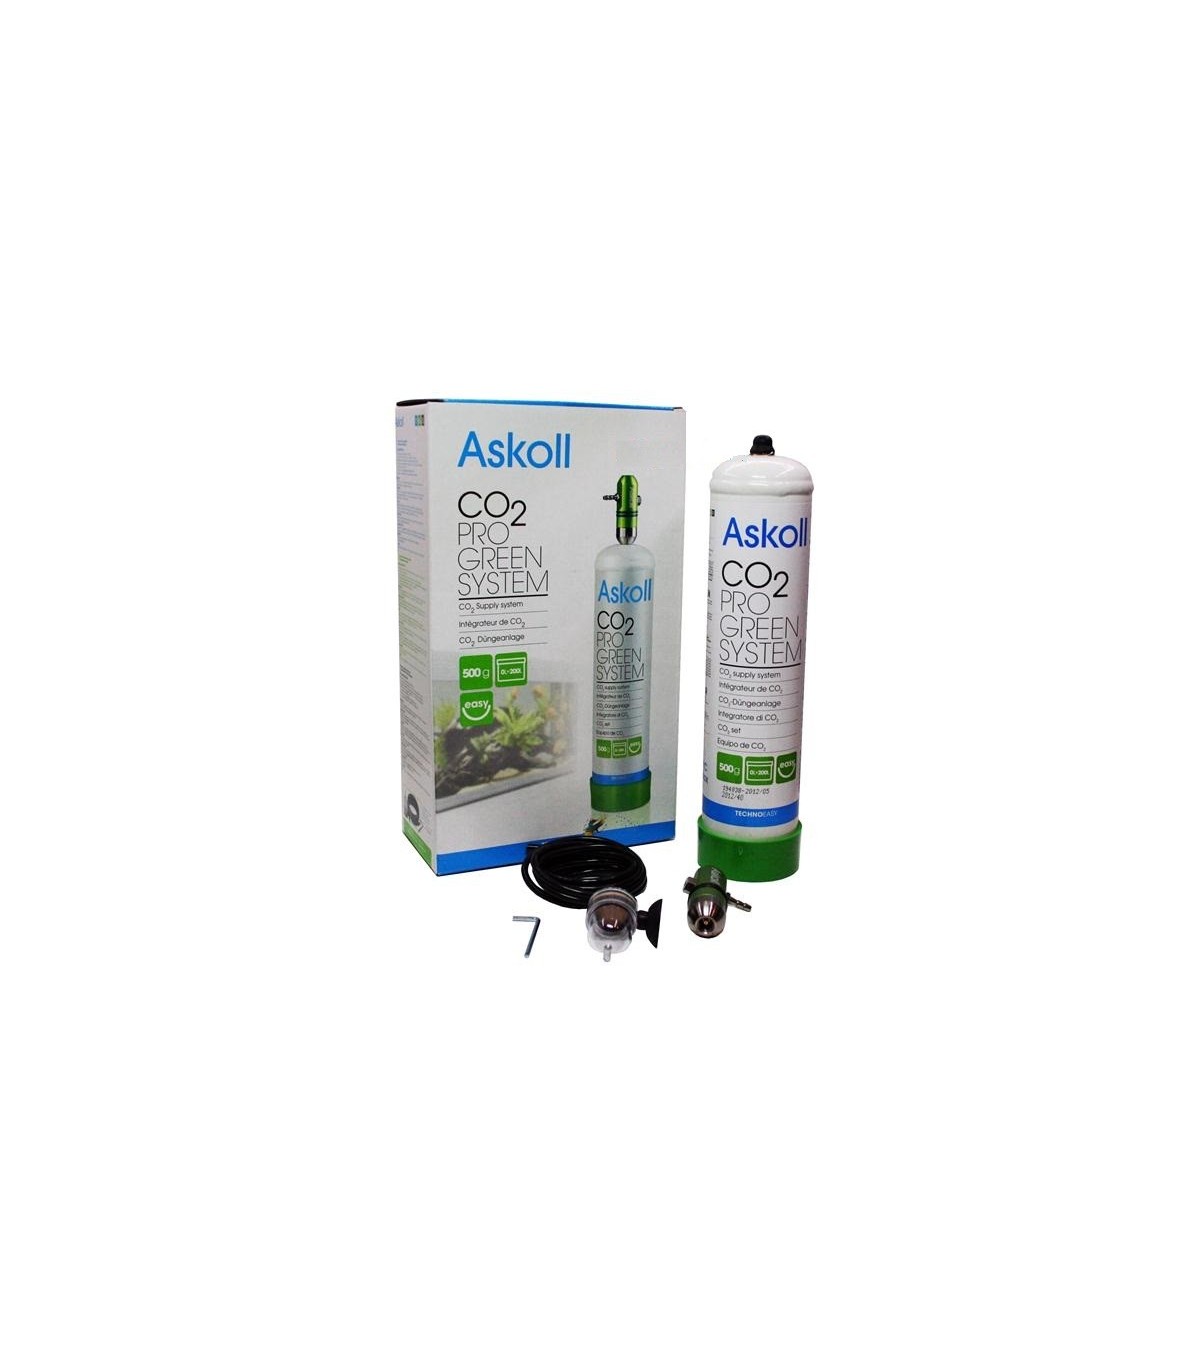 Image of CO2 ASKOLL PRO GREEN SYSTEM